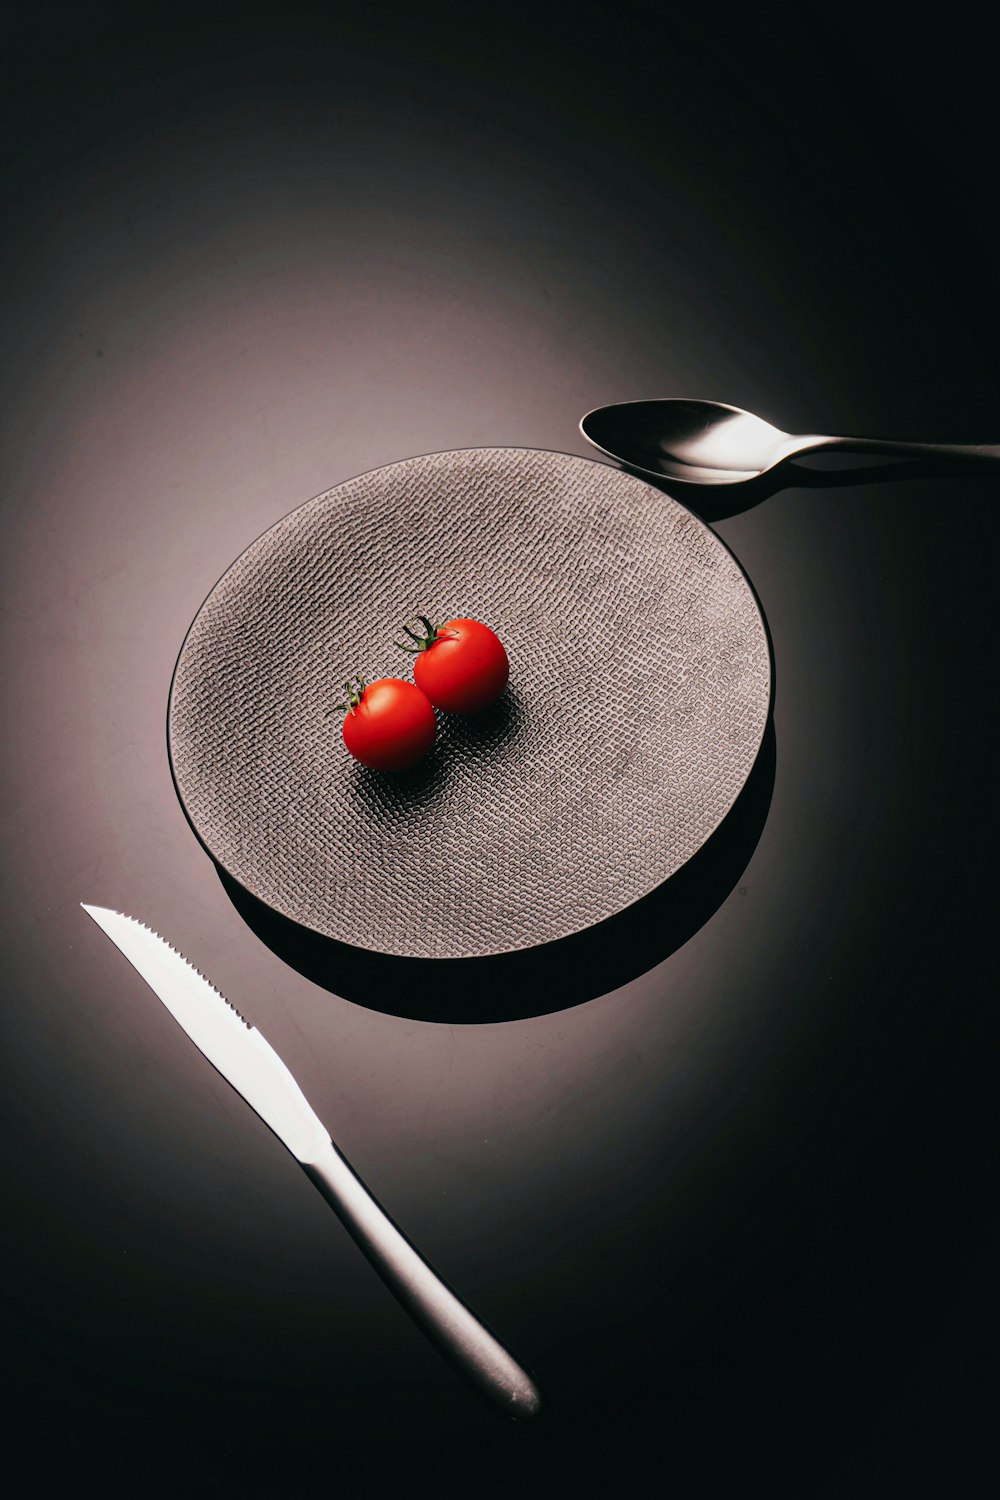 a plate with a tomato on it next to a knife and fork